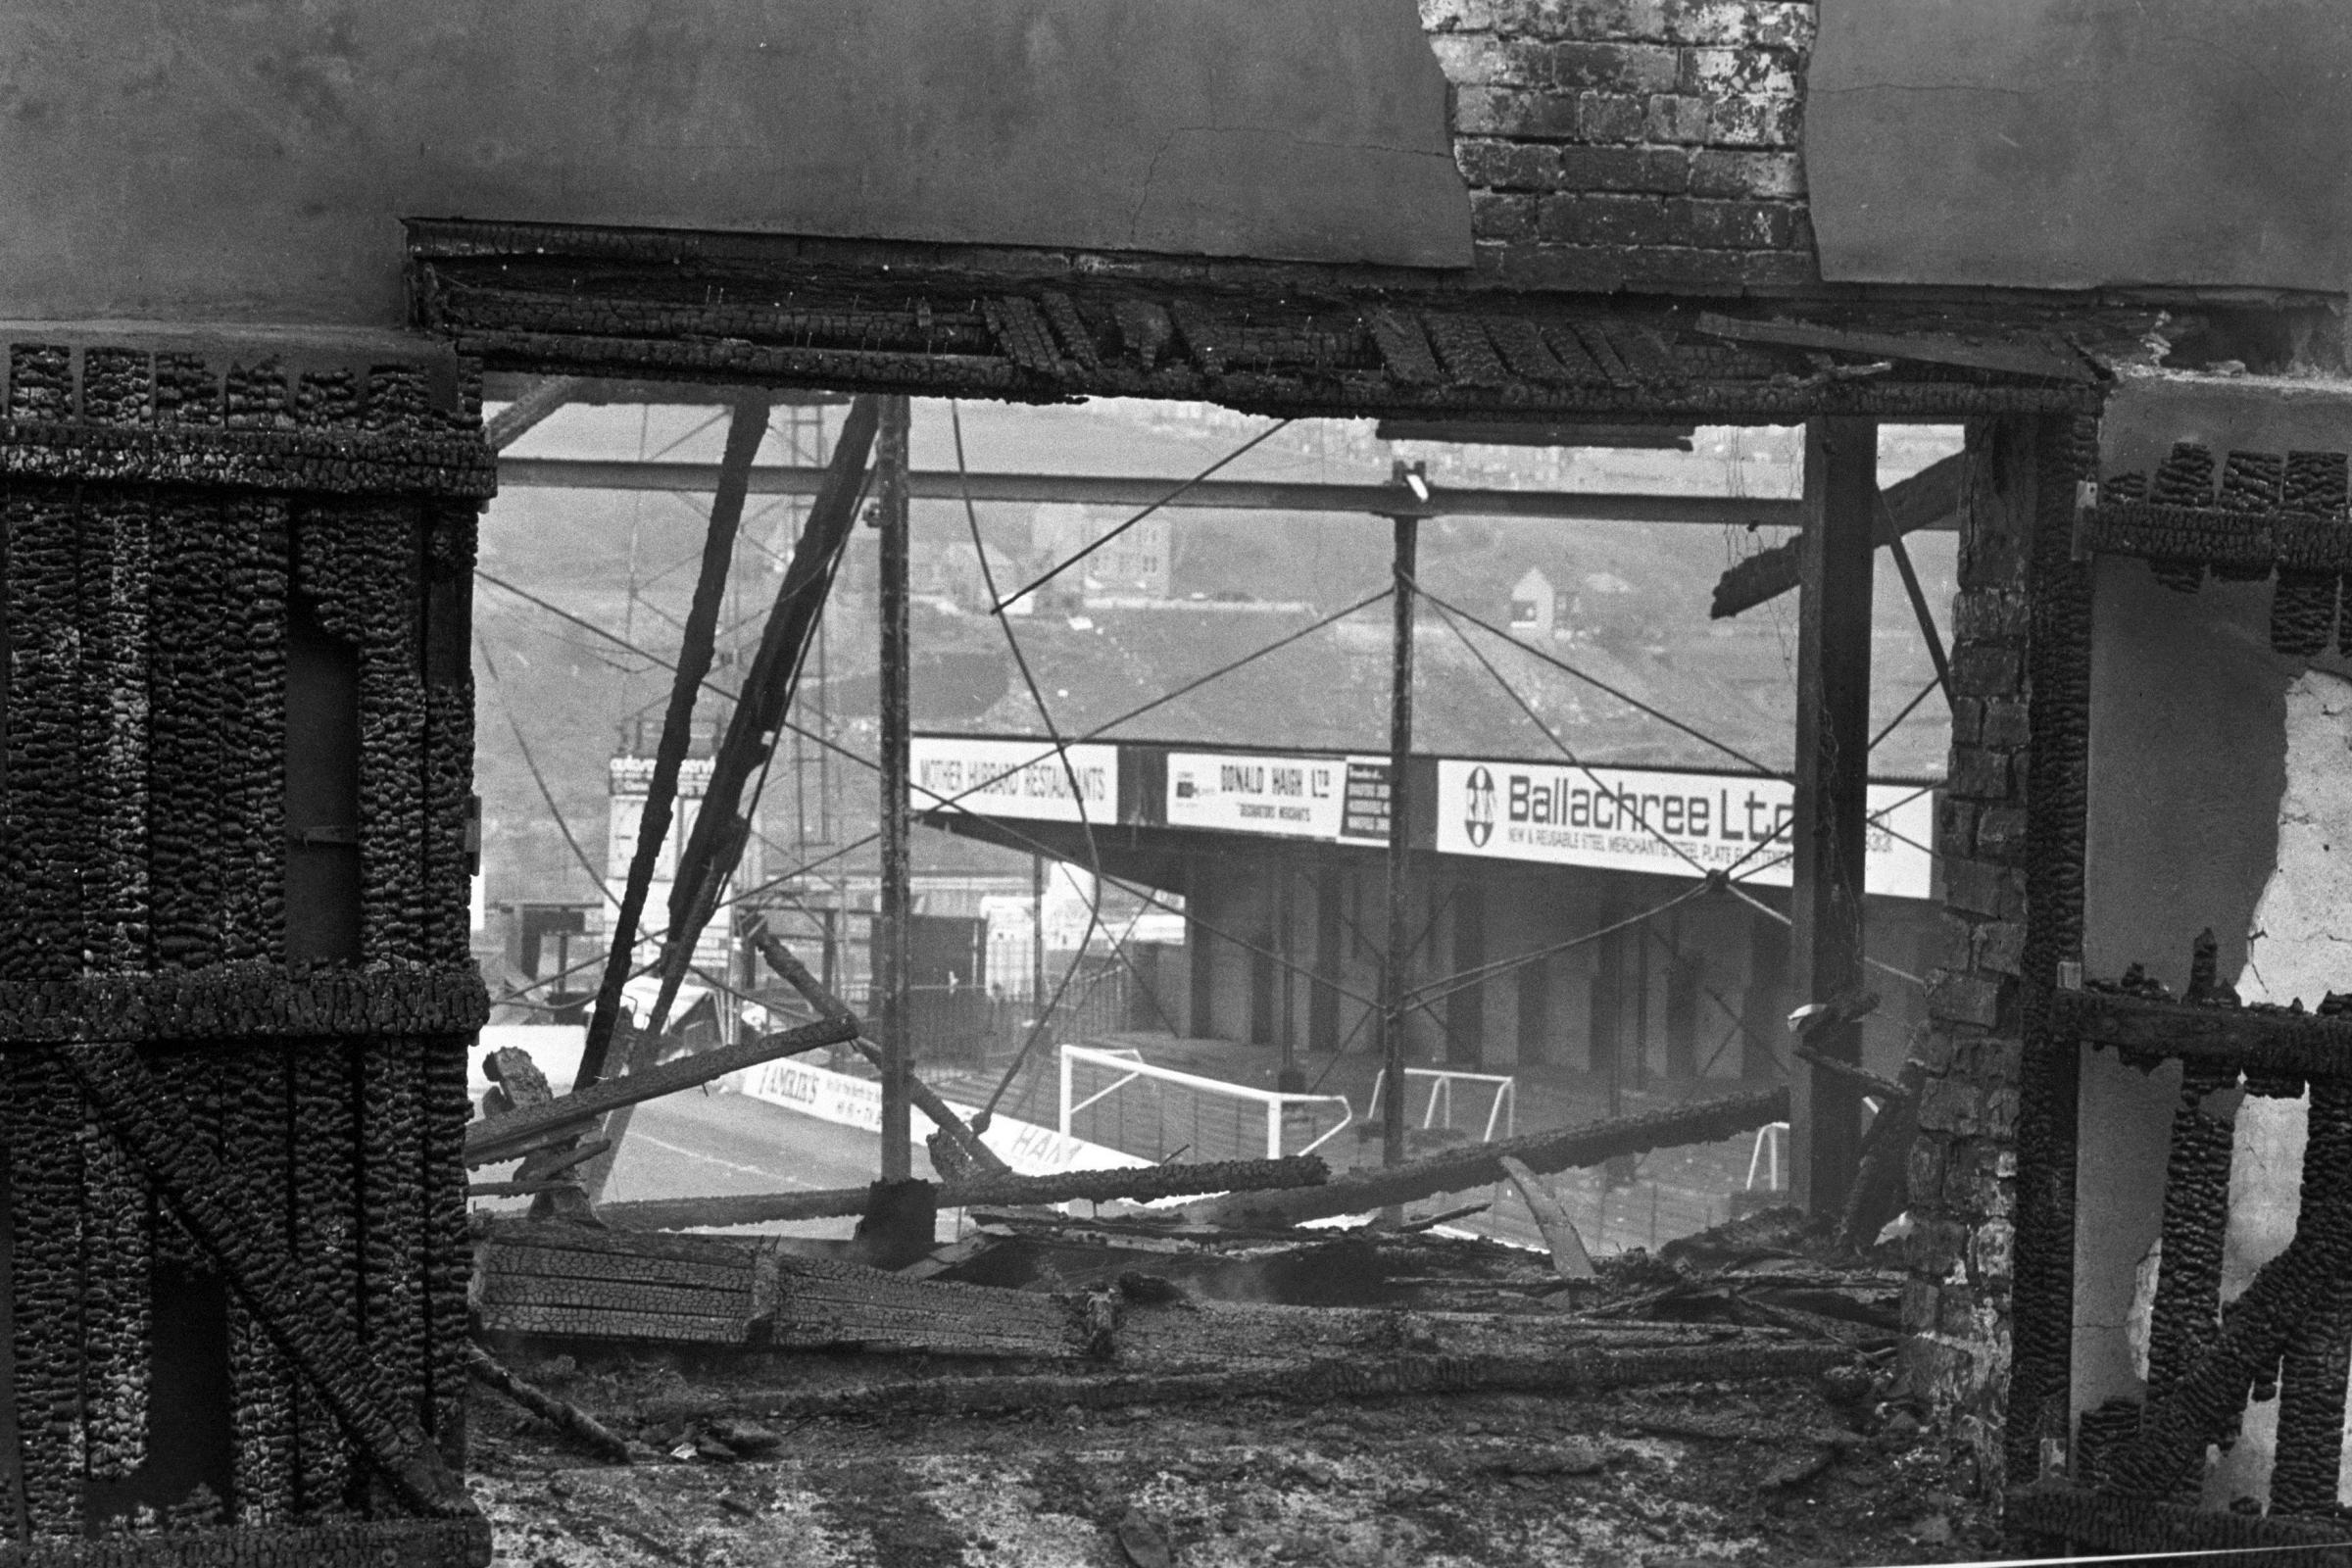 BRADFORD CITY FIRE DISASTER: 'New inquiry was not right thing to do' - survivor